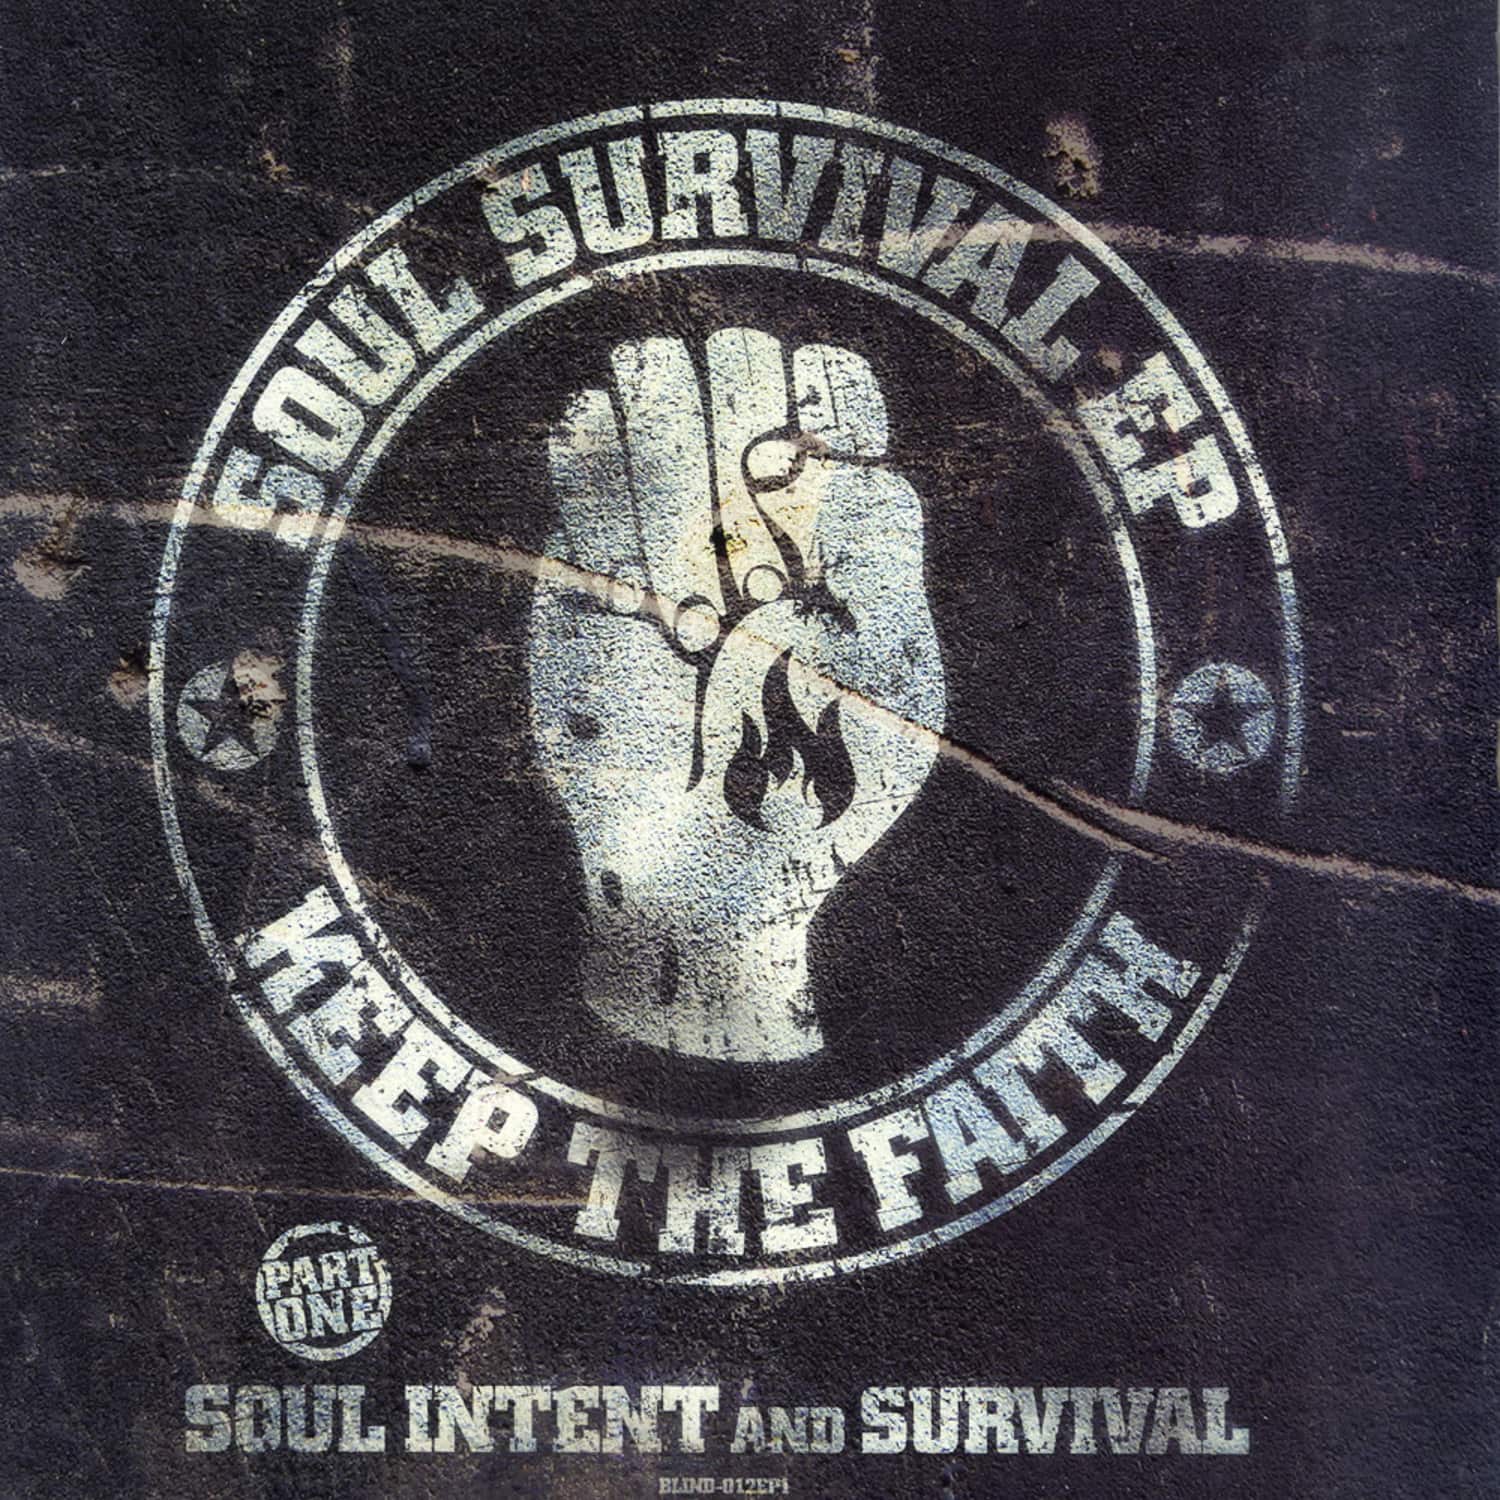 Survival / Soul Intent - PLACE WITH NO NAME / BRO